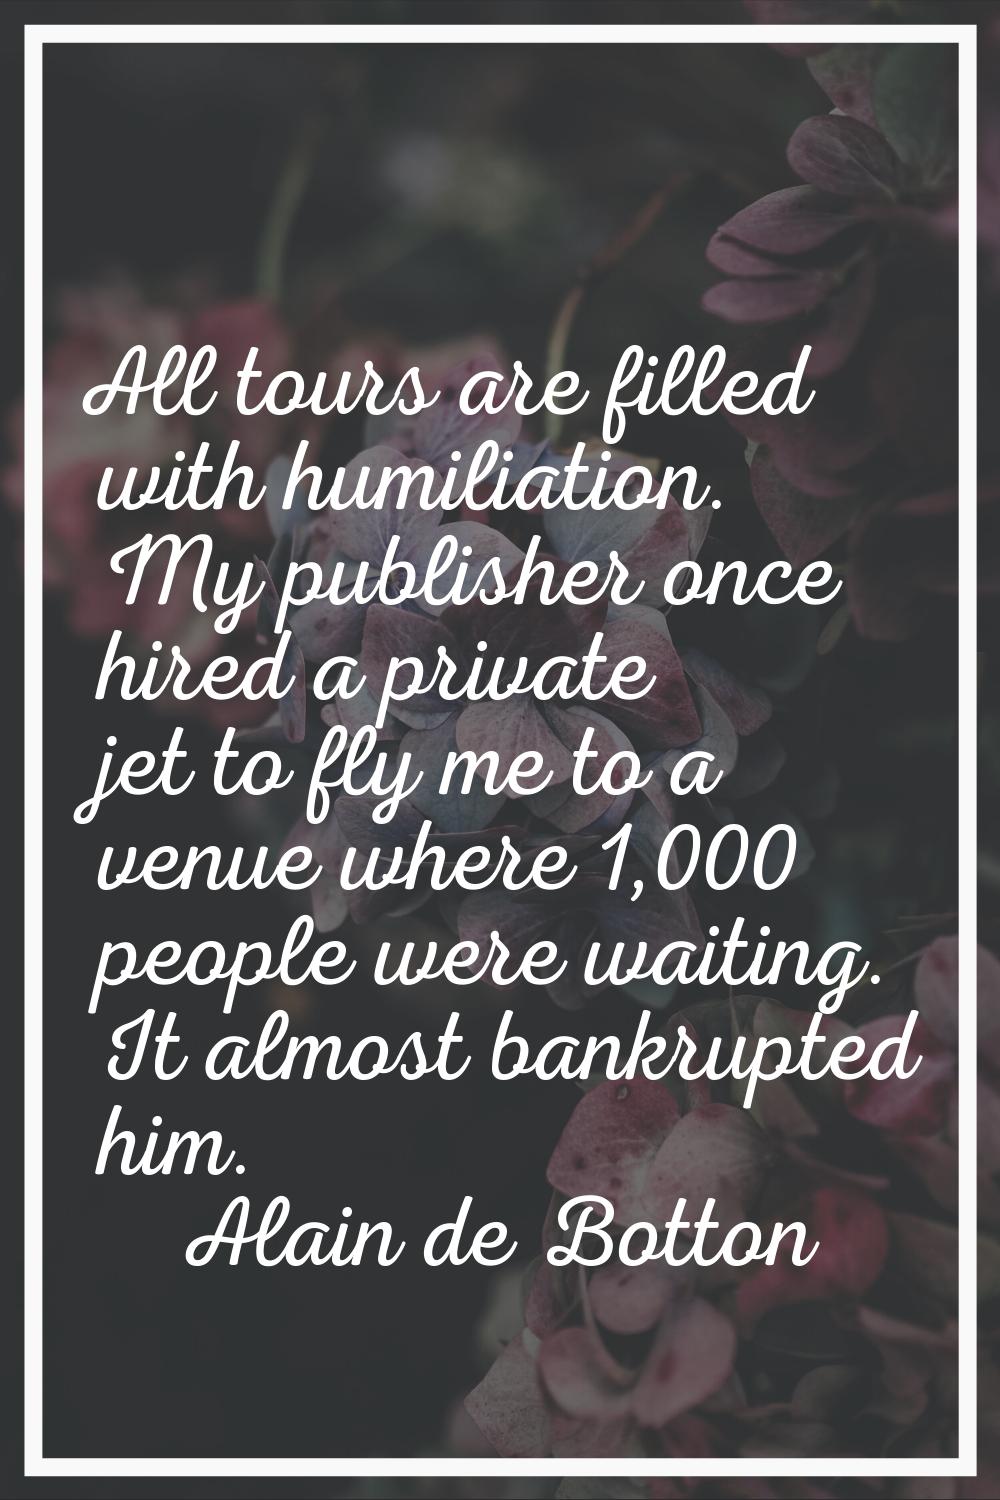 All tours are filled with humiliation. My publisher once hired a private jet to fly me to a venue w